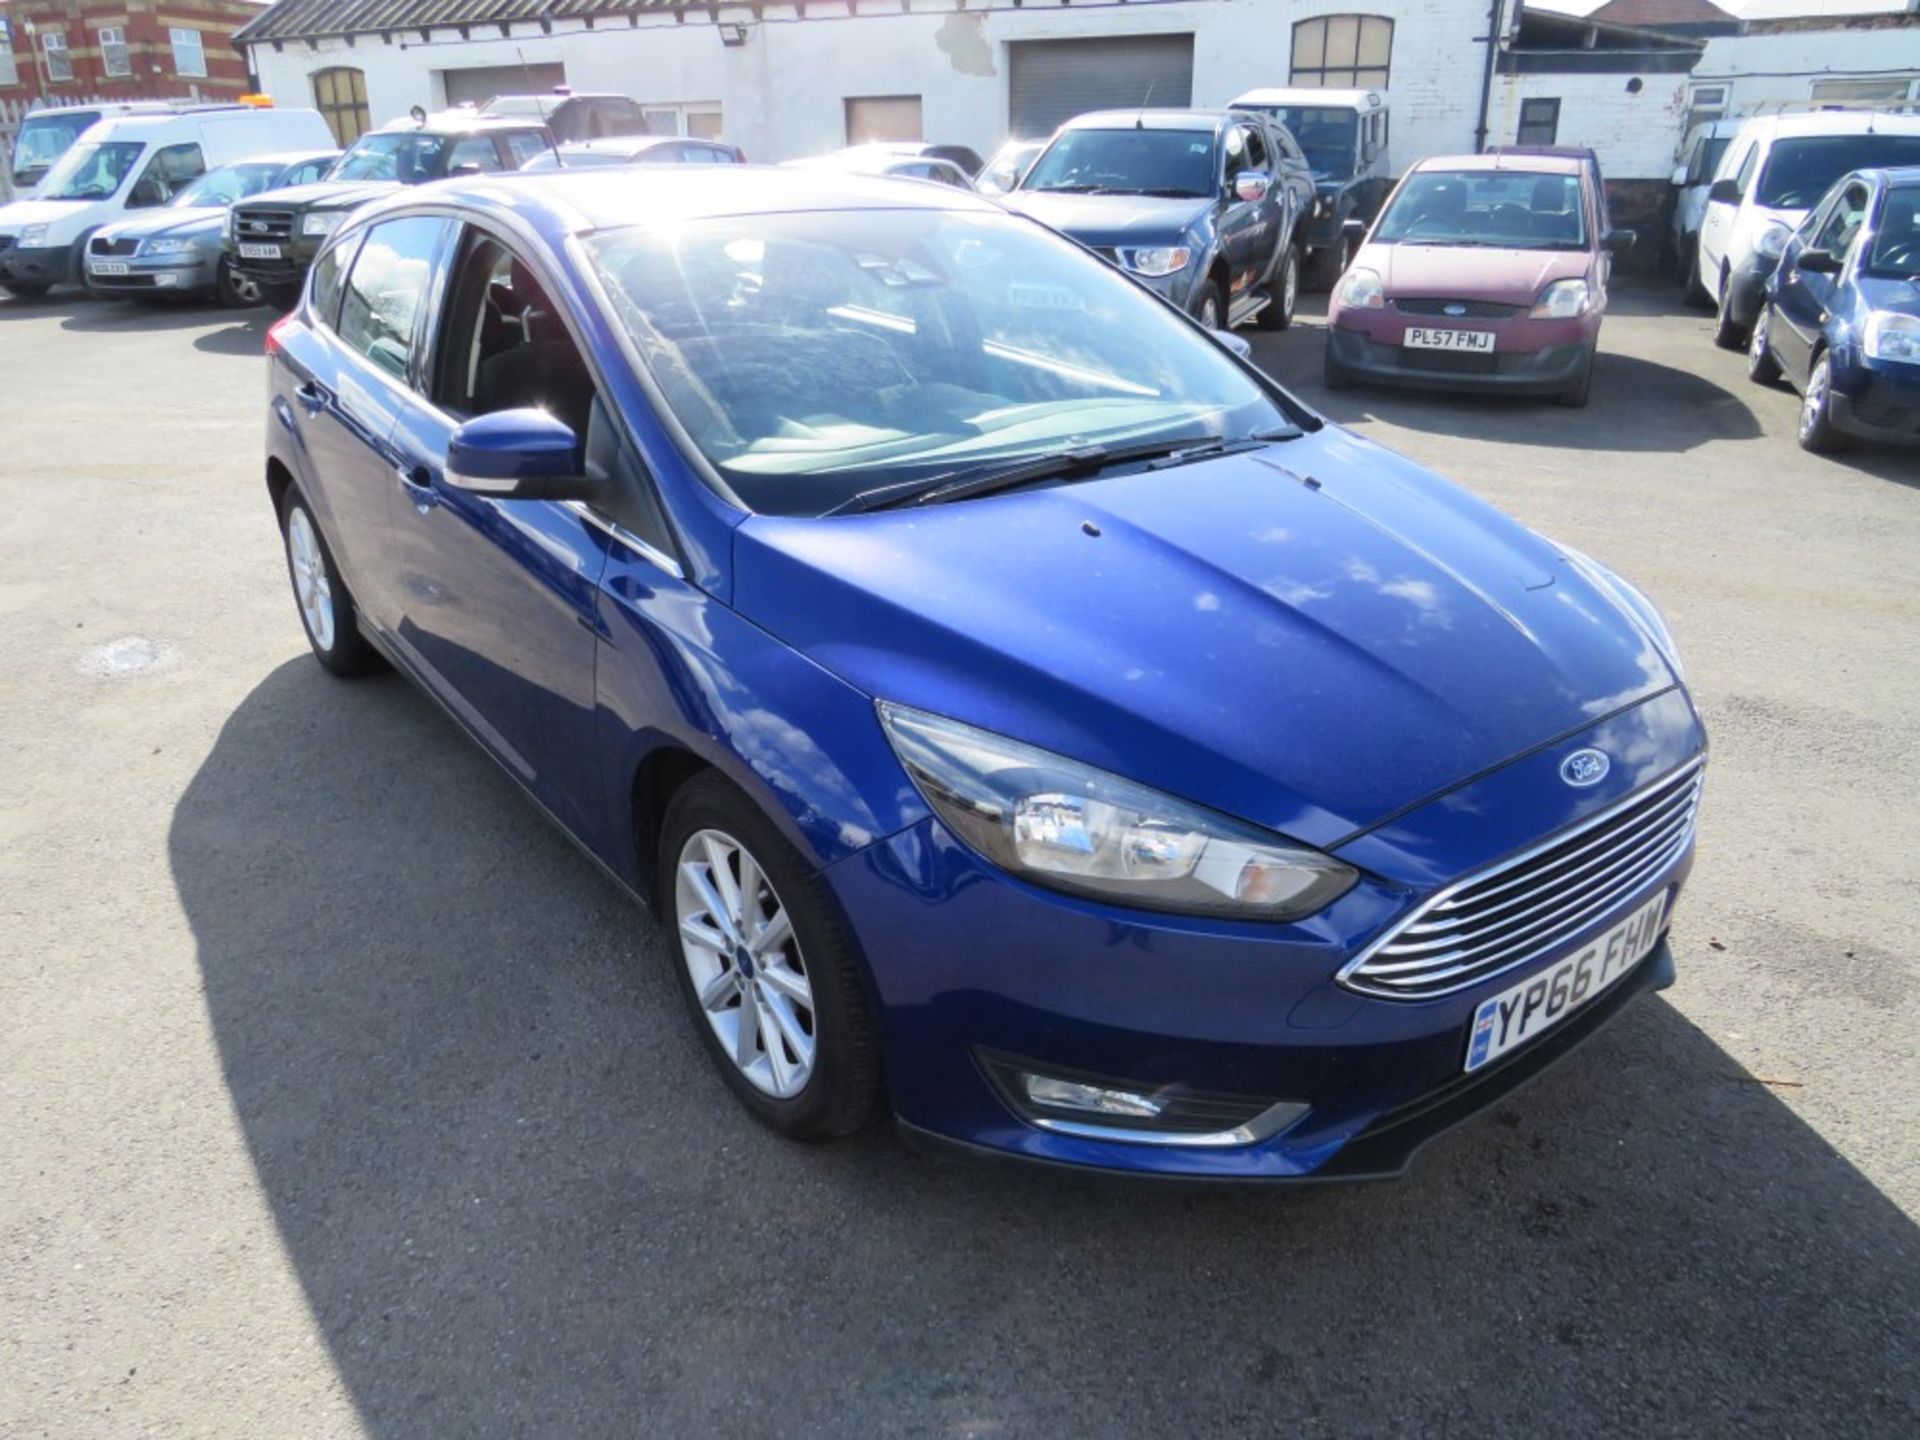 66 reg FORD FOCUS TITANIUM TDCI, 1ST REG 10/16, 98694M WARRANTED, V5 HERE, 1 OWNER FROM NEW [NO